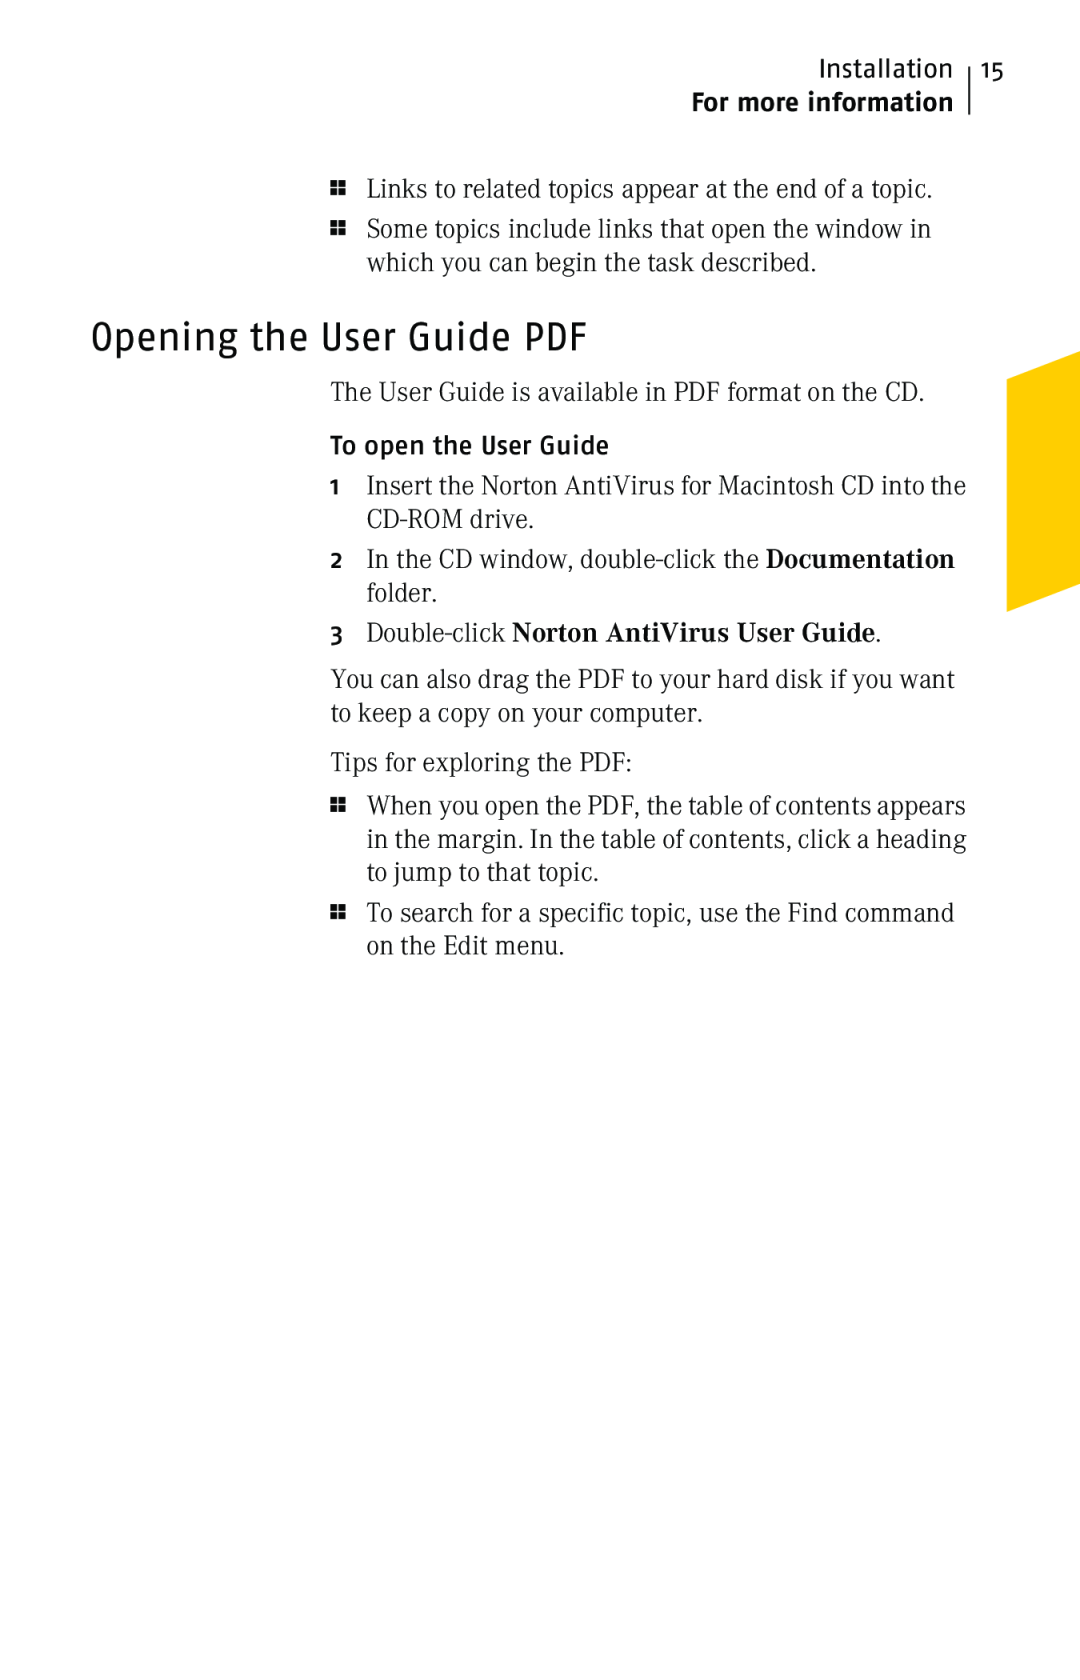 Symantec 10 manual Opening the User Guide PDF, For more information, 3Double-click Norton AntiVirus User Guide 